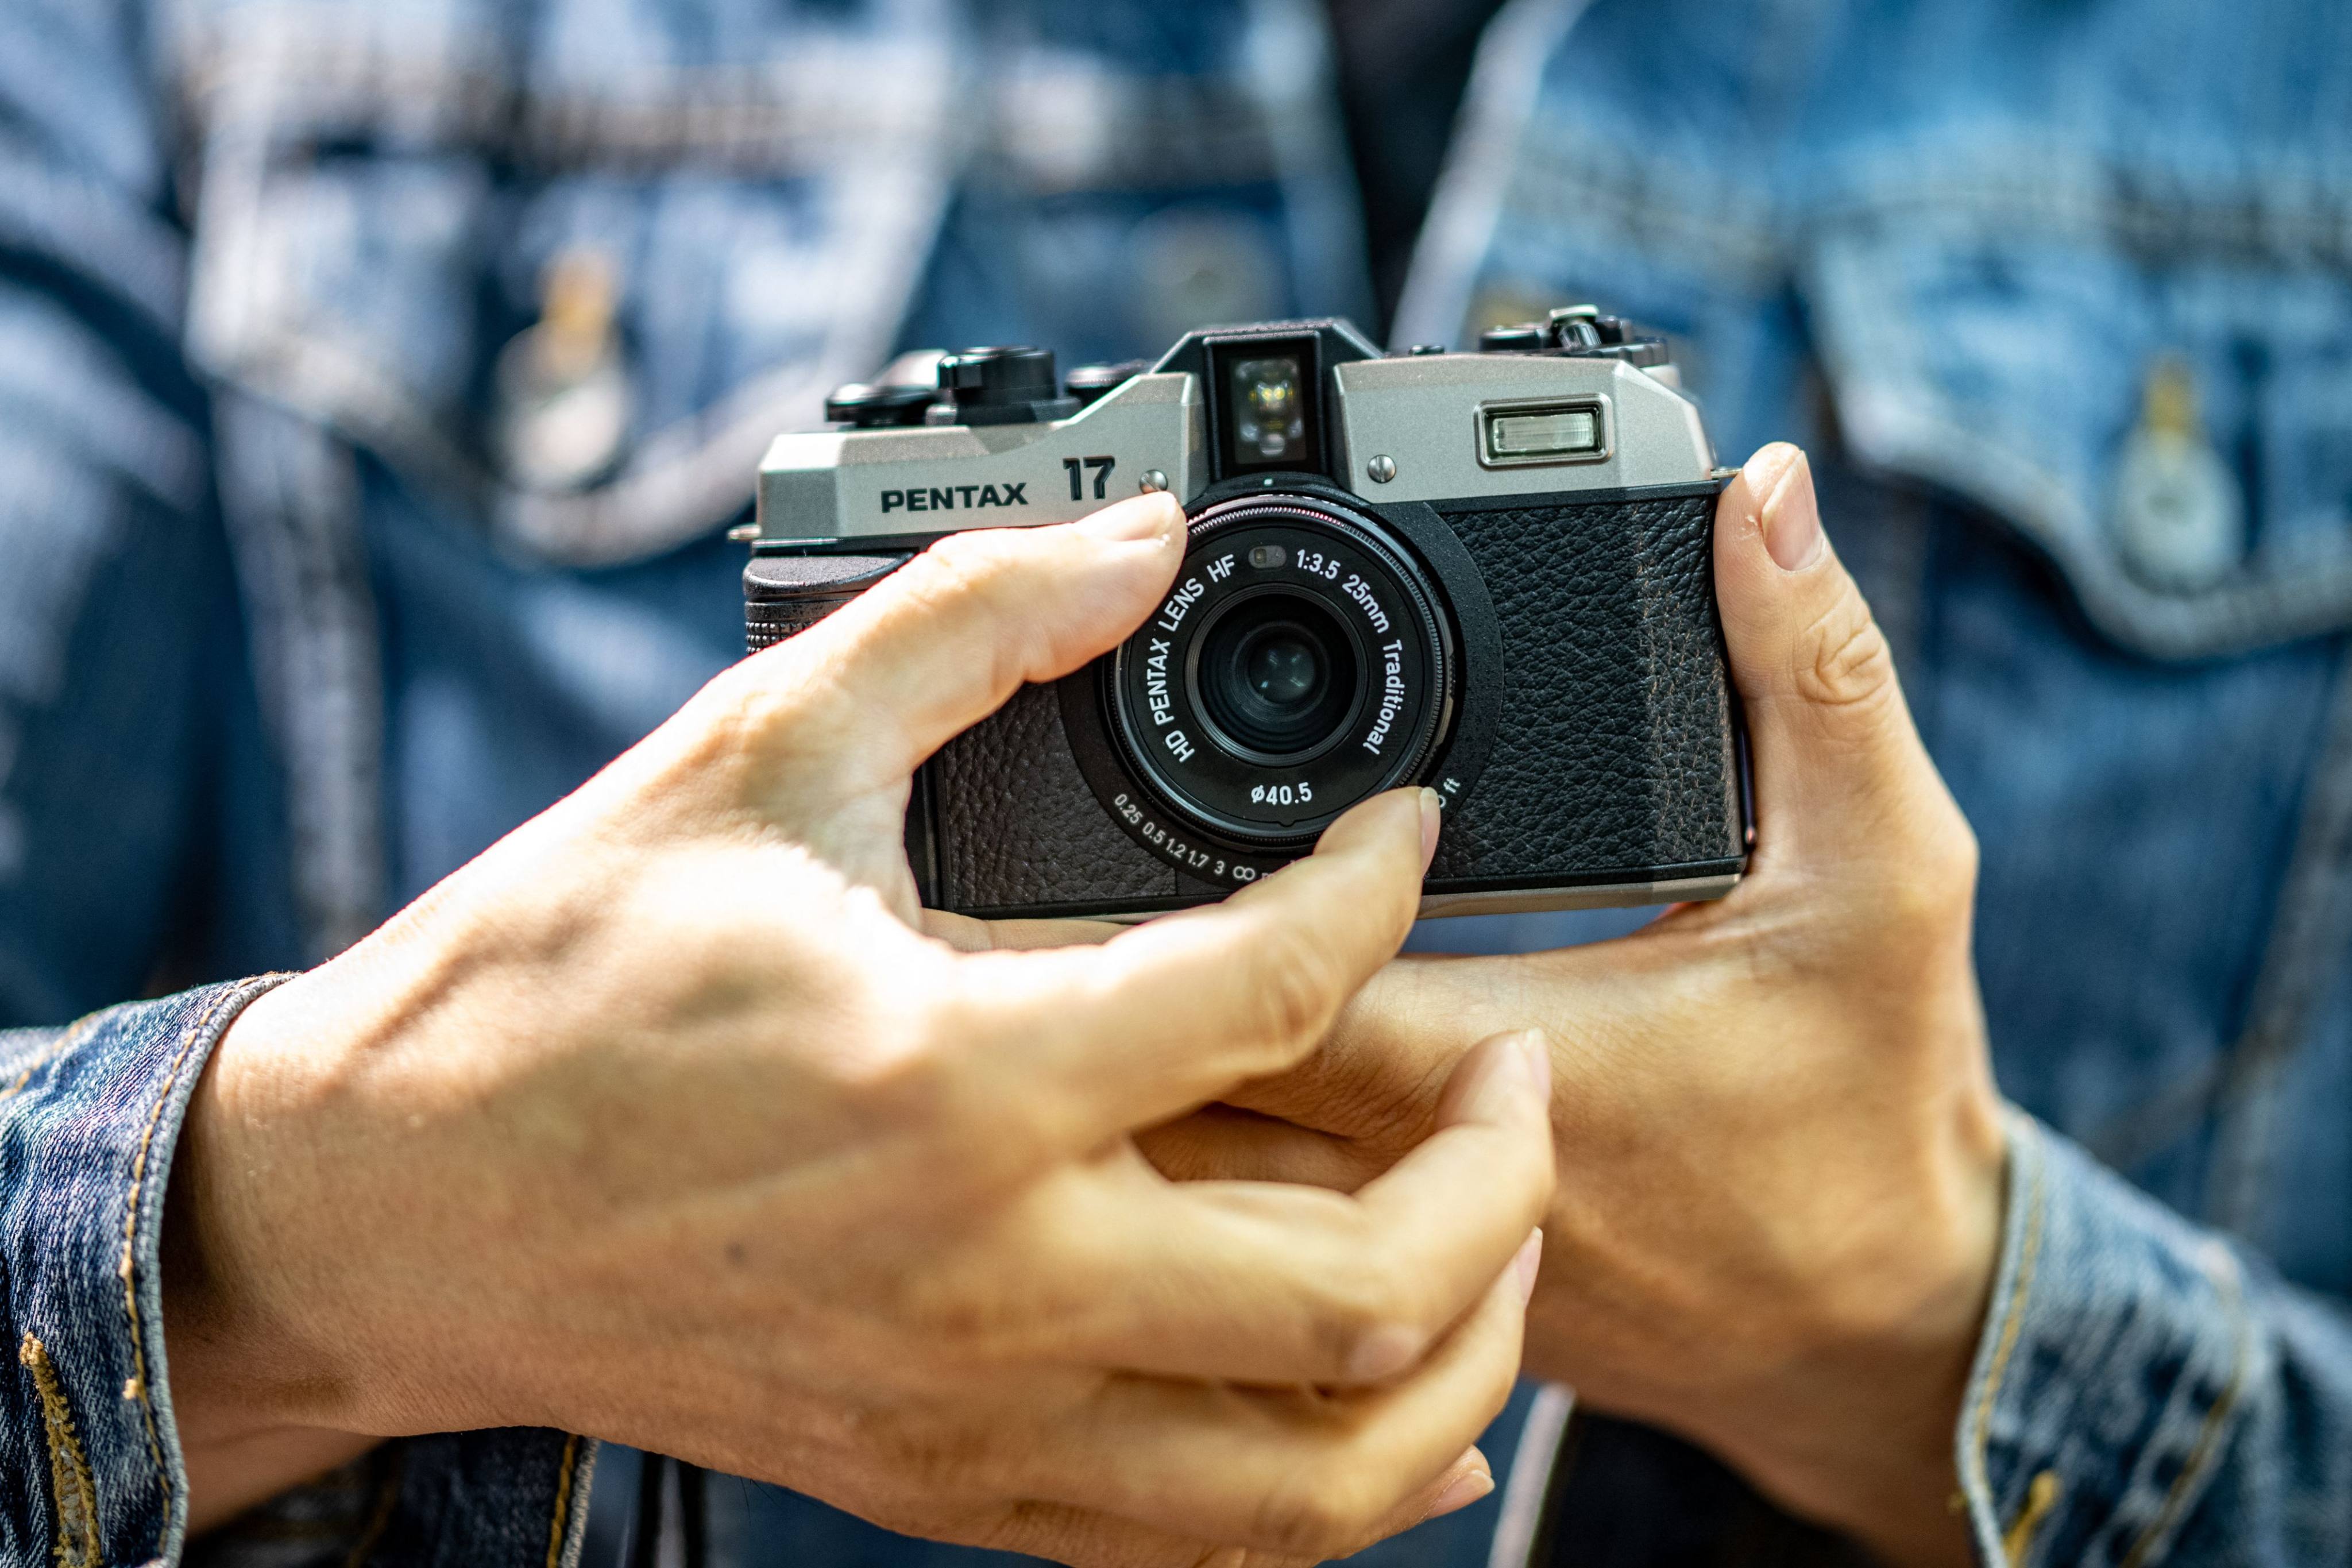 The Pentax 17 is the Japanese brand’s first analogue camera in two decades, and taps into a growing trend of young people taking old-fashioned photos for social media. Photo: AFP